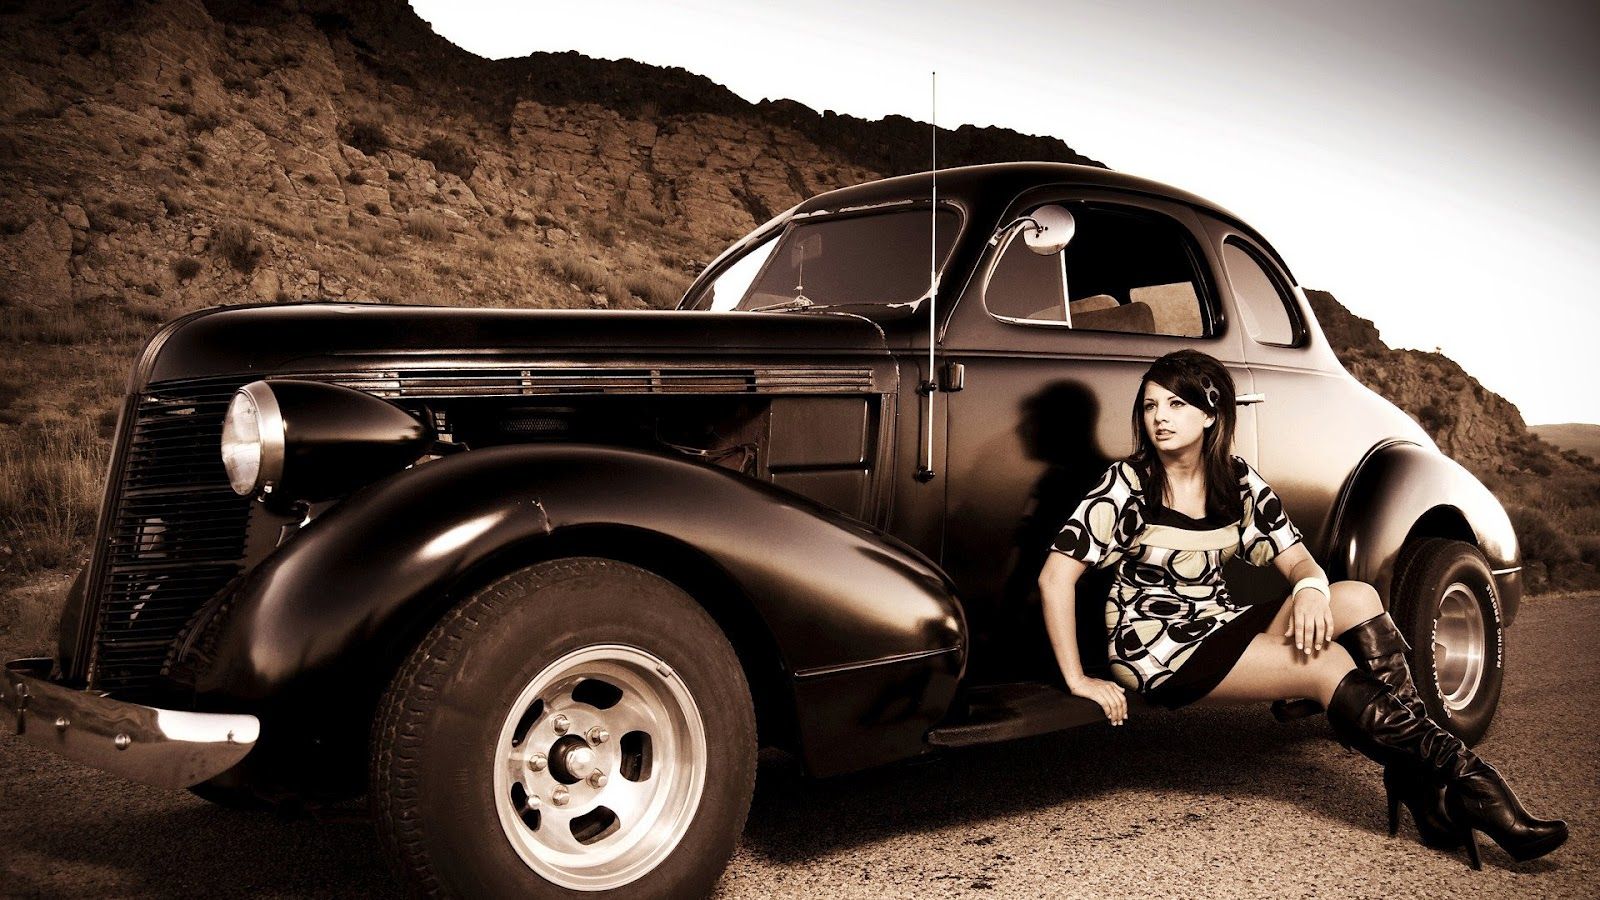 Download Antique Vintage Car And Girl Old Looking Photo Hd ...